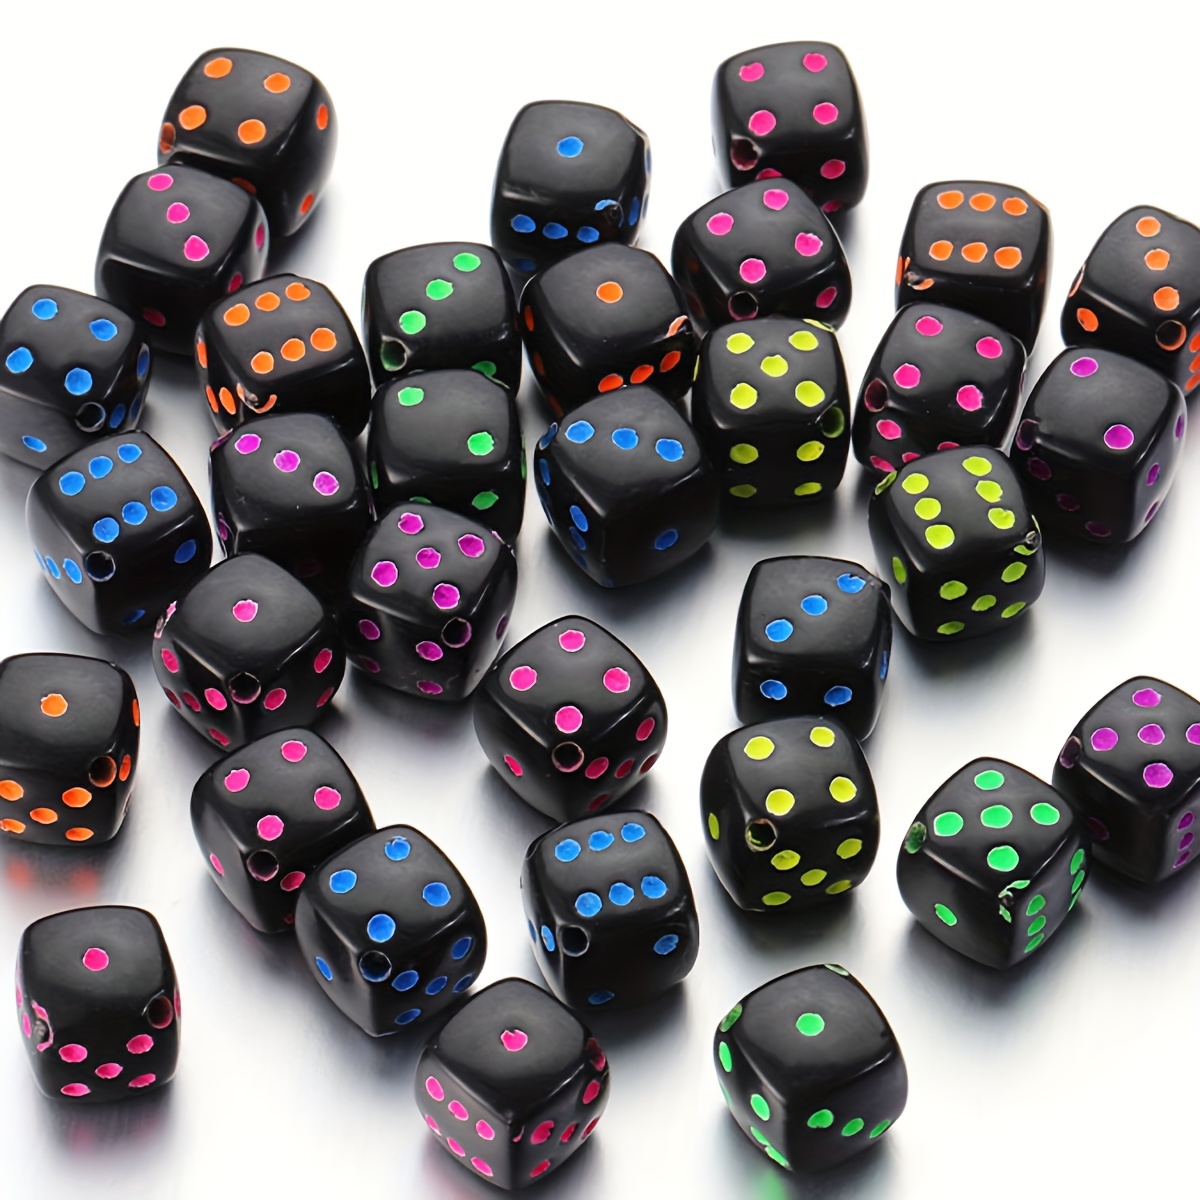 30pcs/lot 8mm Acrylic Colorful Dice Beads Creative Fashion For DIY Bracelet  Necklace Ornaments Children's Toys Accessories Jewelry Making Supplies